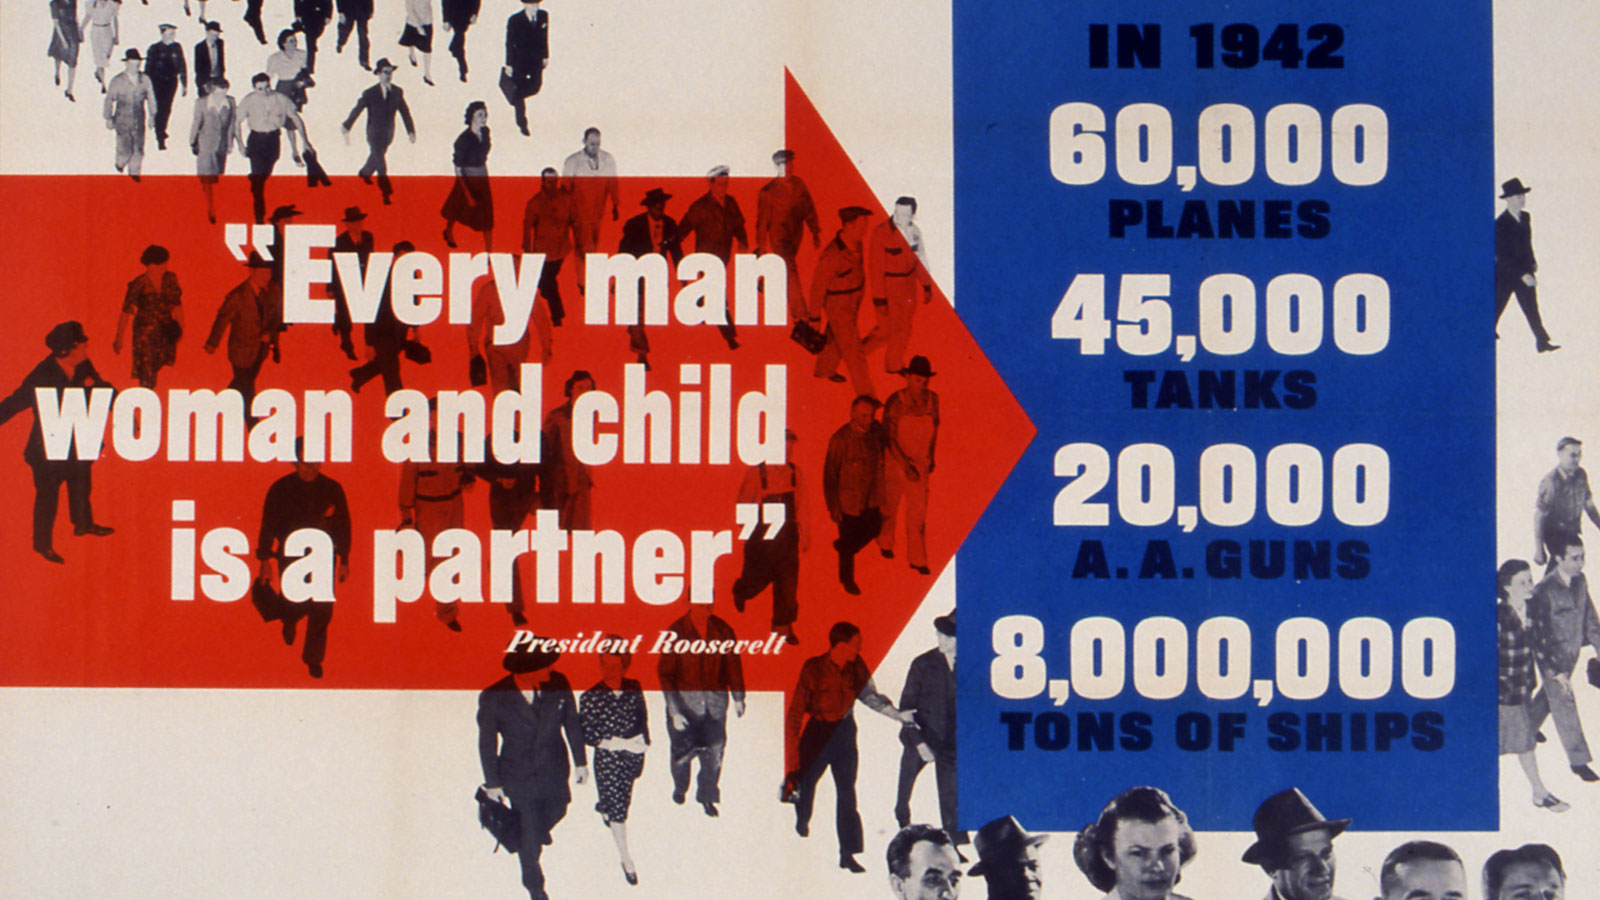 Poster promoting increased production of war-related supplies